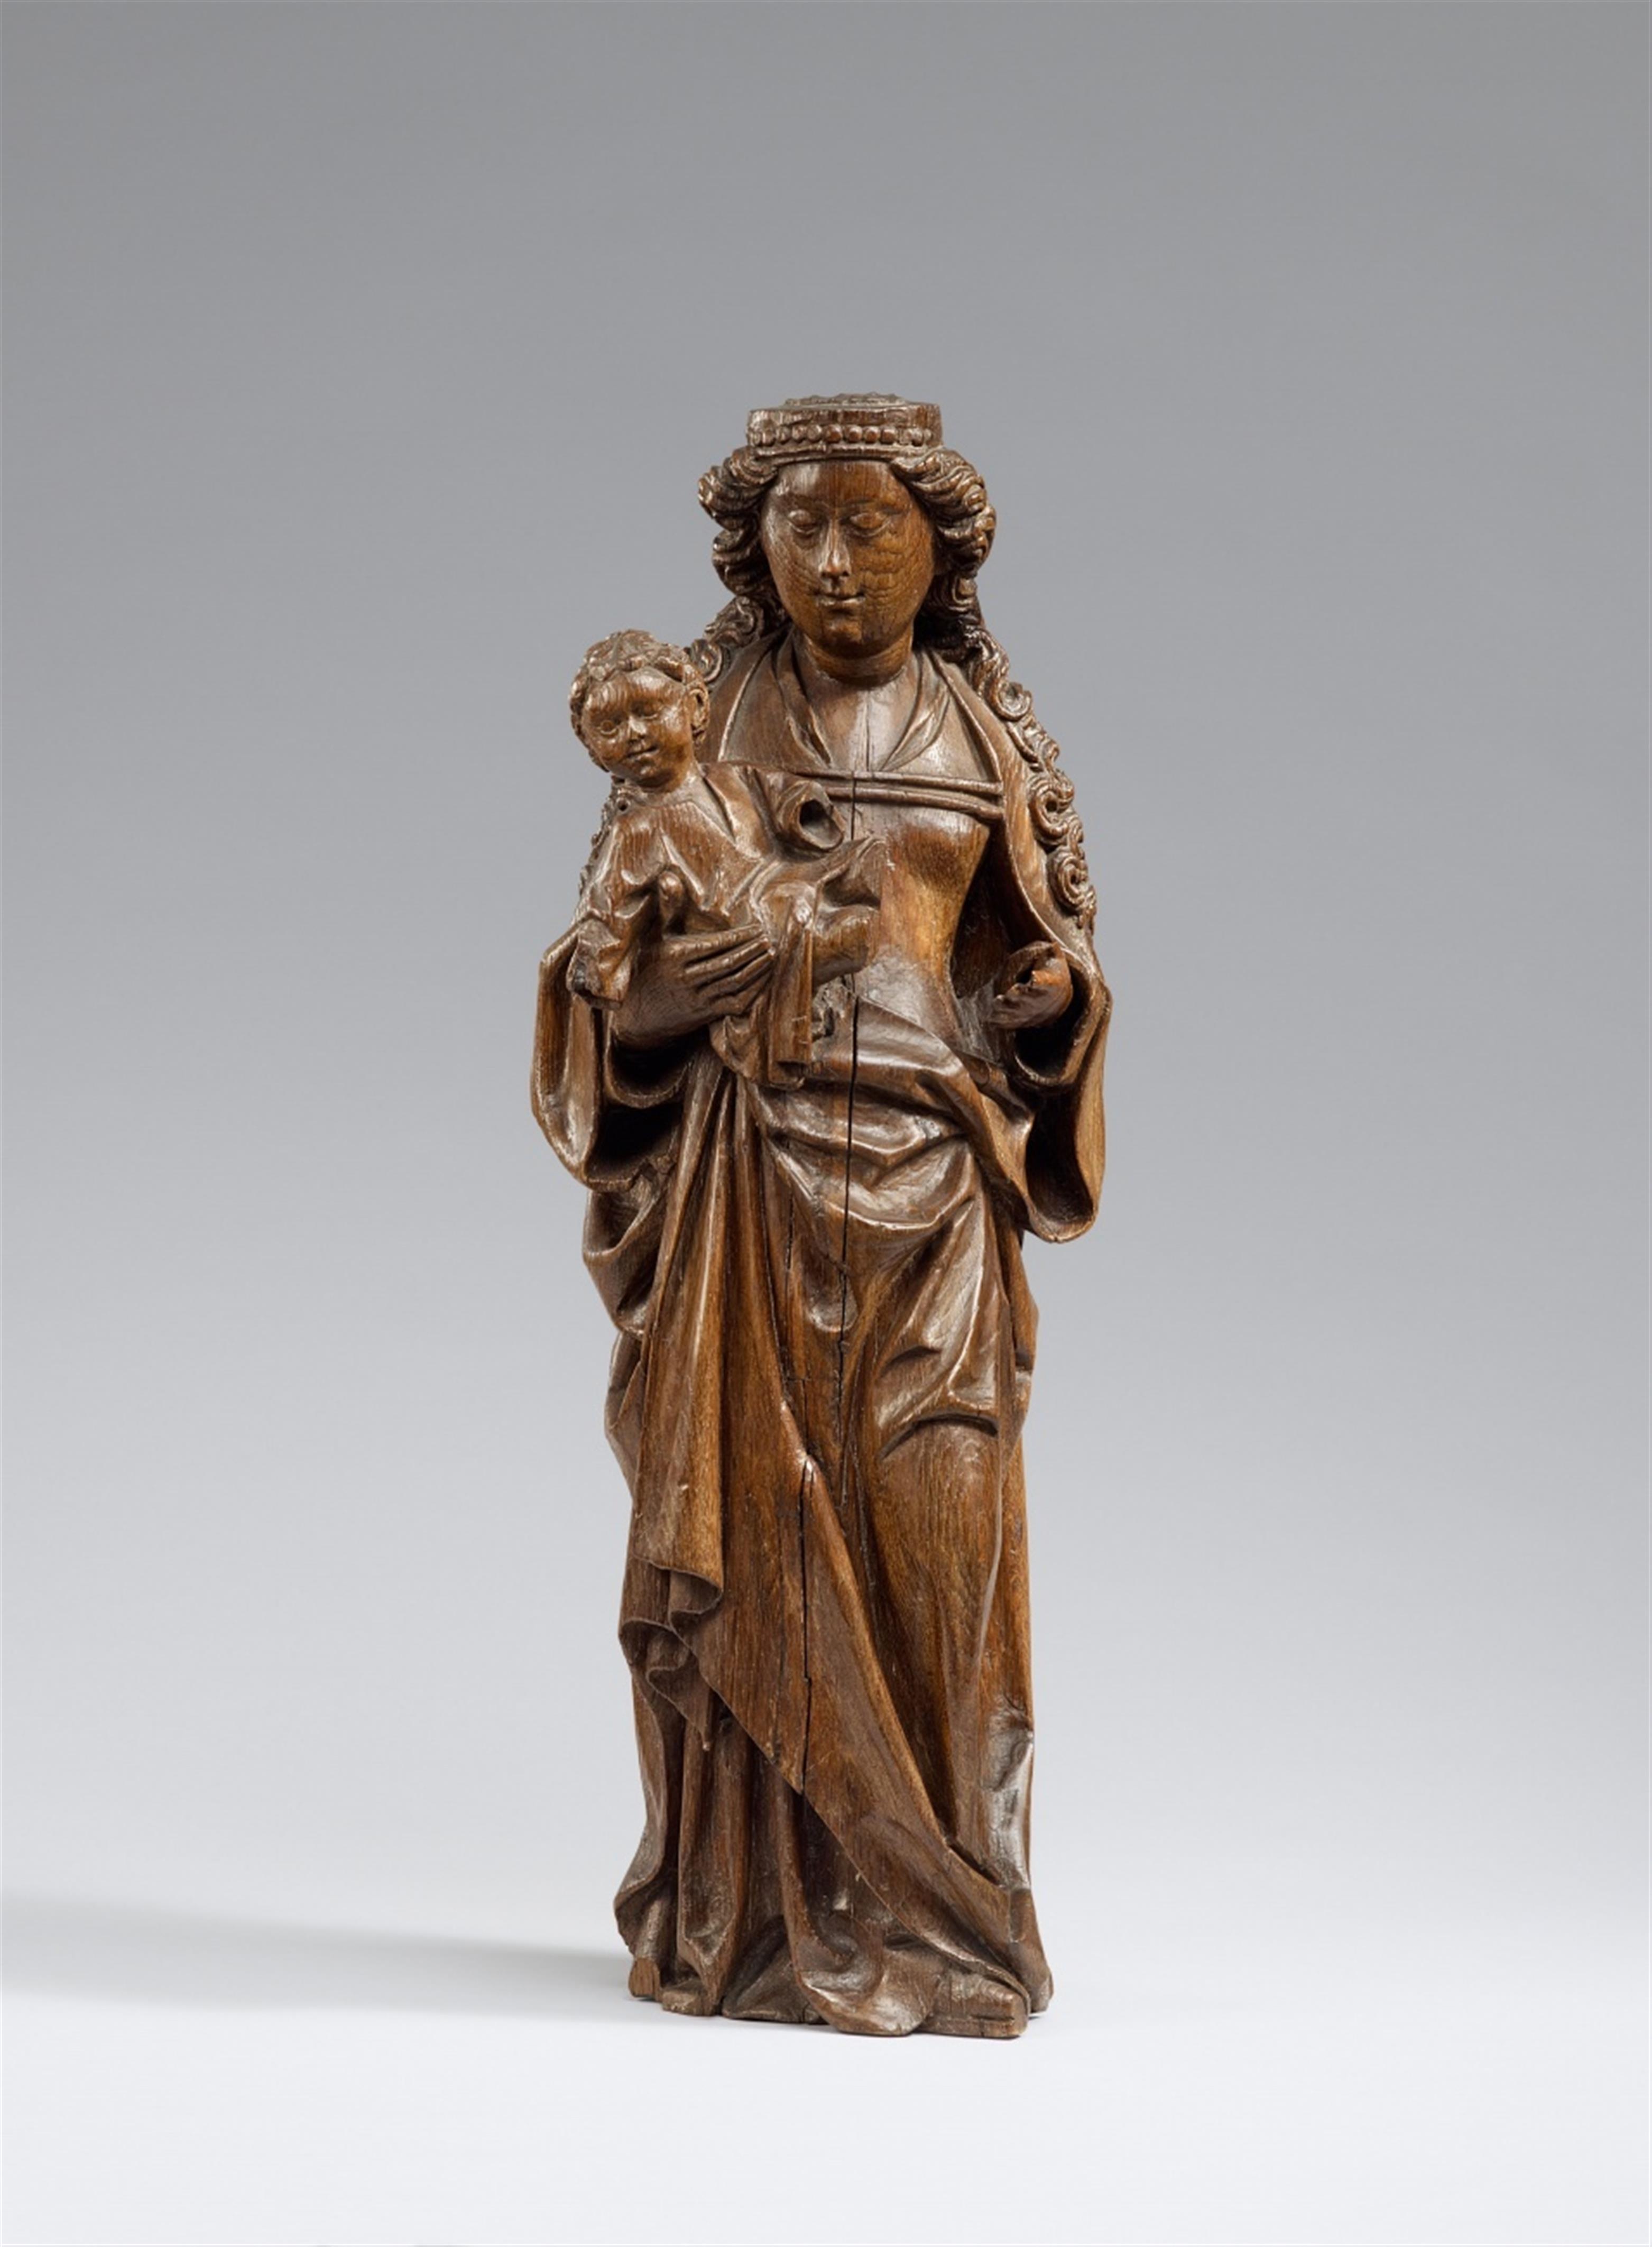 Probably Maasland early 16th century - An early 16th century carved oak figure of the Virgin and Child, probably Meuse Region. Madonna mit Kind - image-1